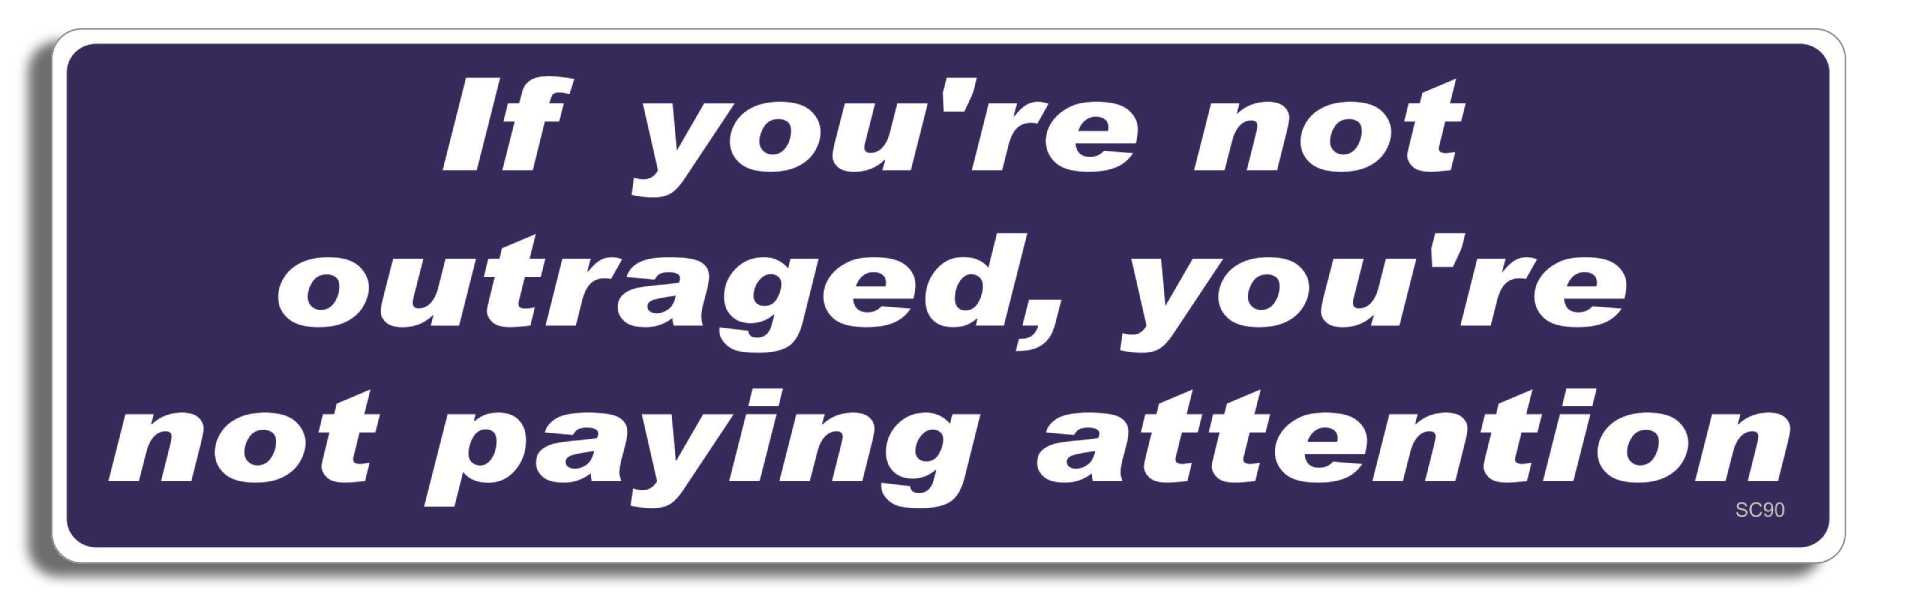 If you're not outraged, you're not paying attention - 3" x 10" Bumper Sticker--Car Magnet- -  Decal Bumper Sticker-political Bumper Sticker Car Magnet If you're not outraged, you're not-  Decal for carsAnti Government, Politics